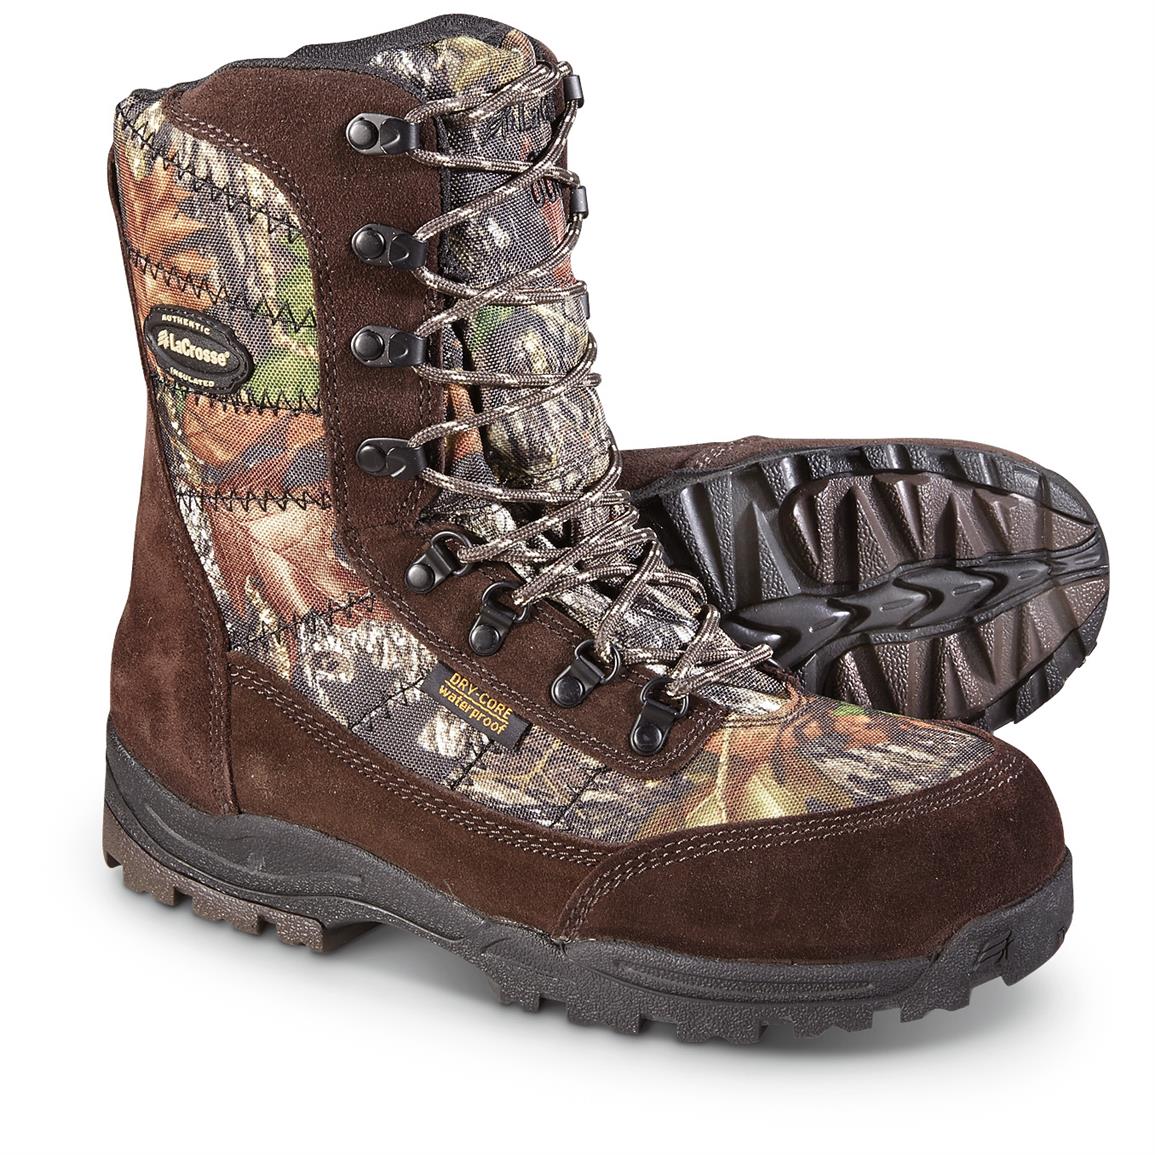 Insulated Waterproof Hunting Boots 